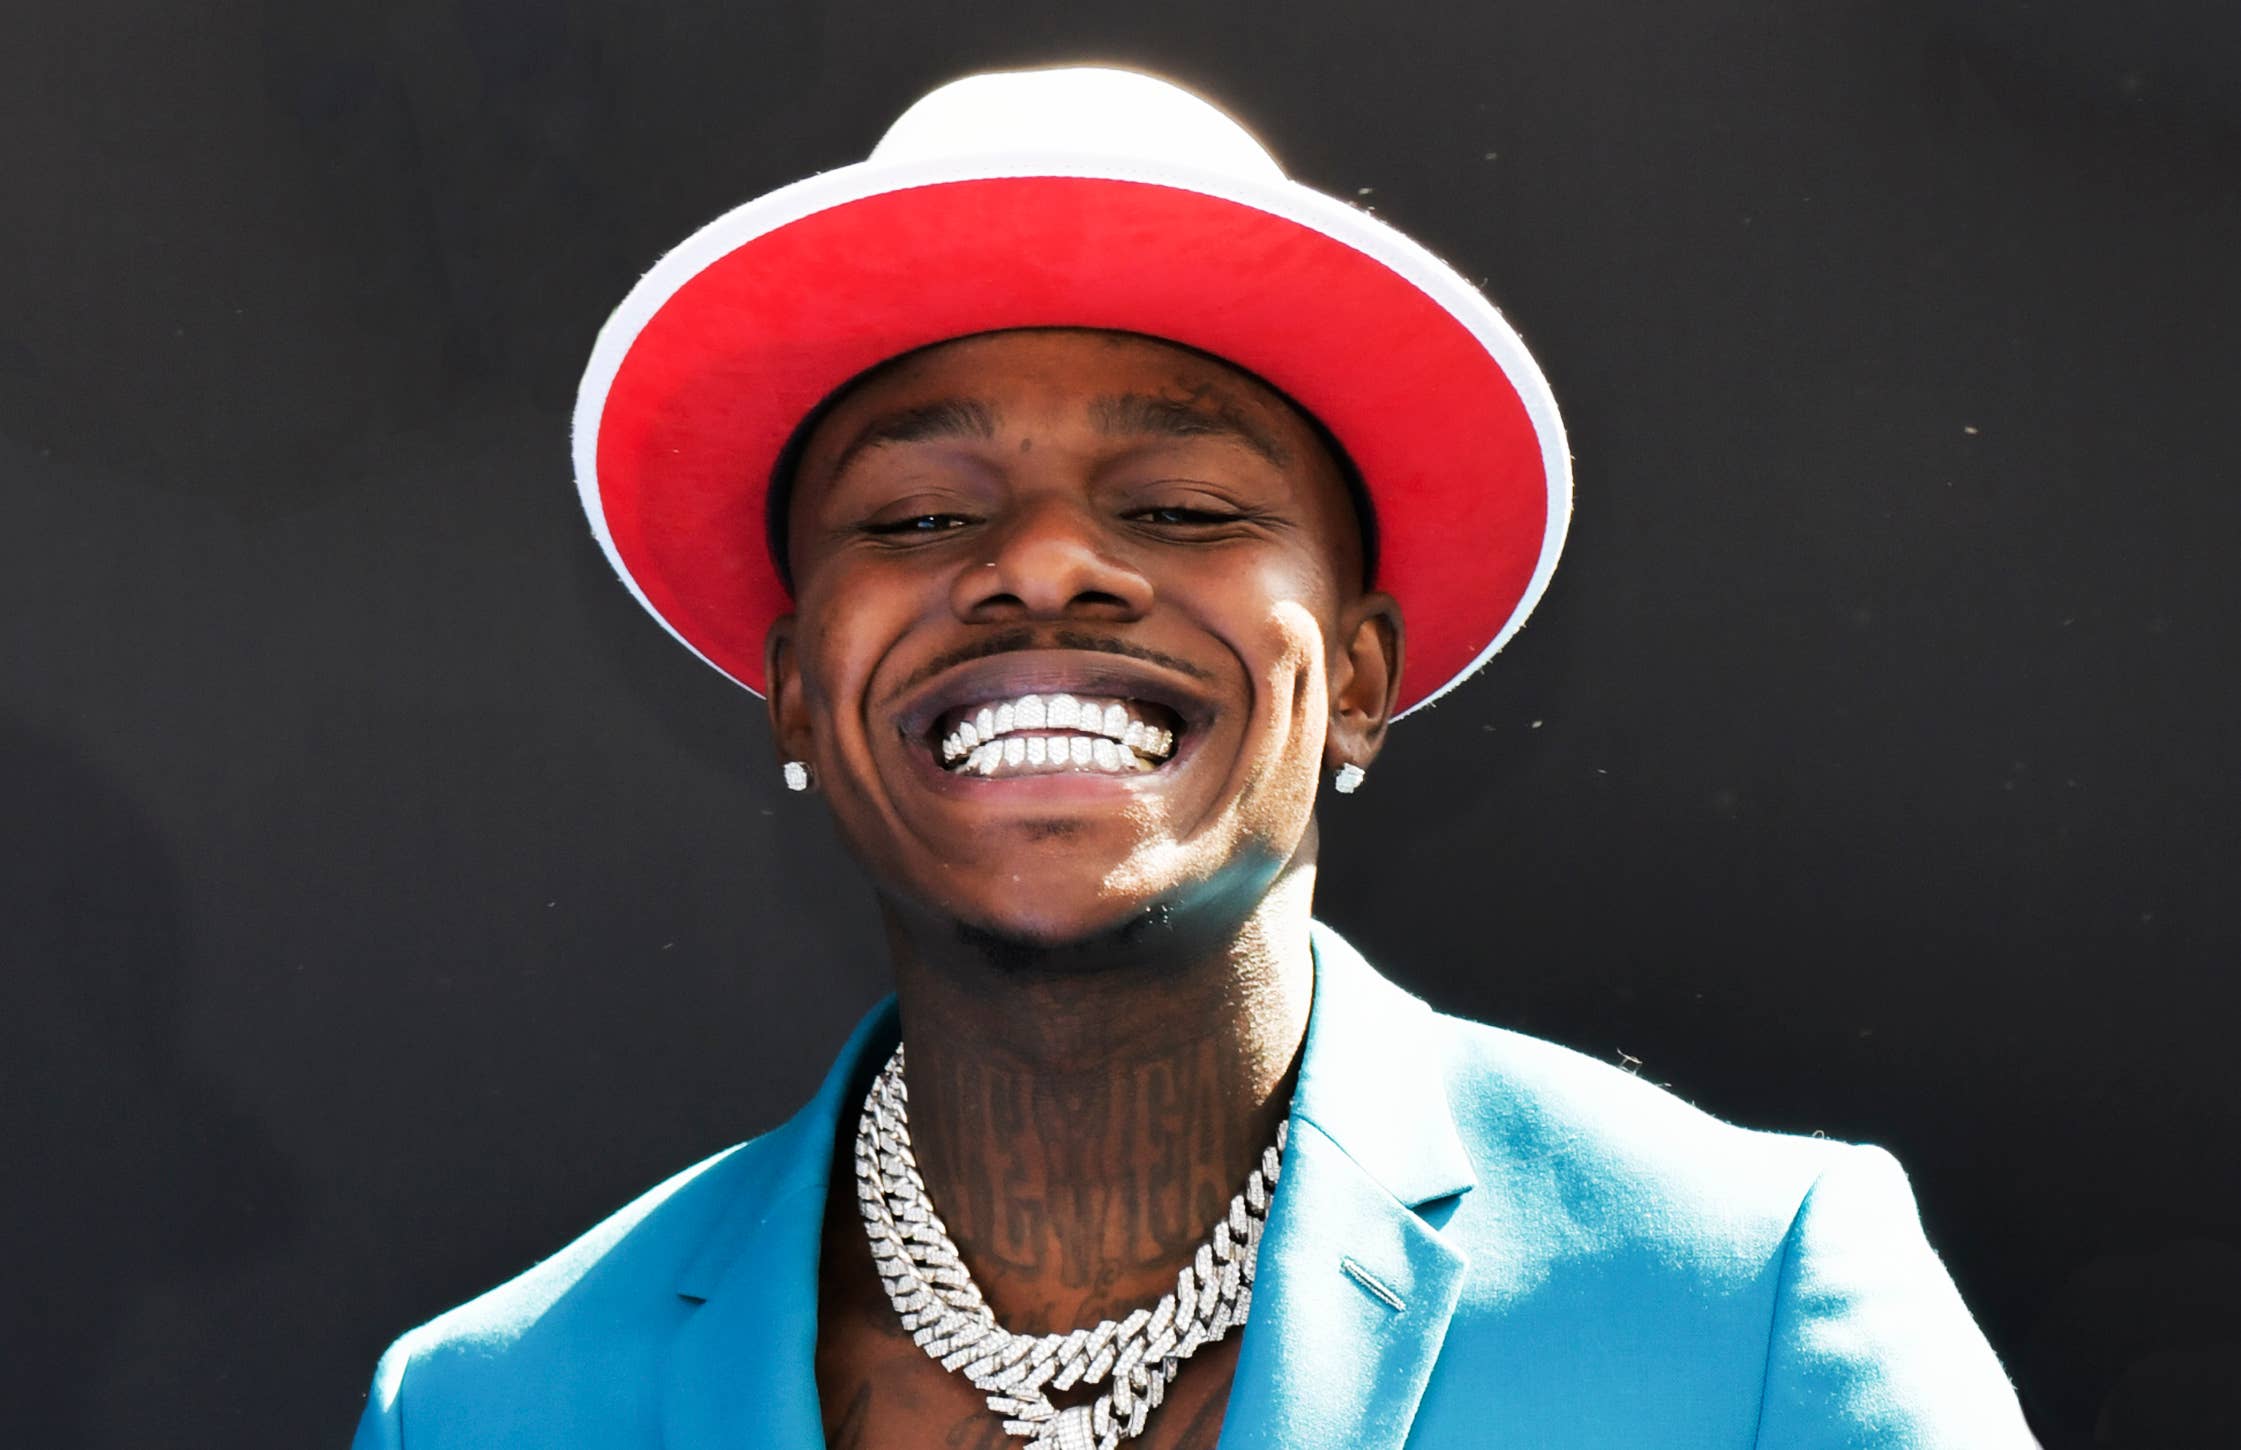 Dababy: Find The Latest Dababy Stories, News & Features